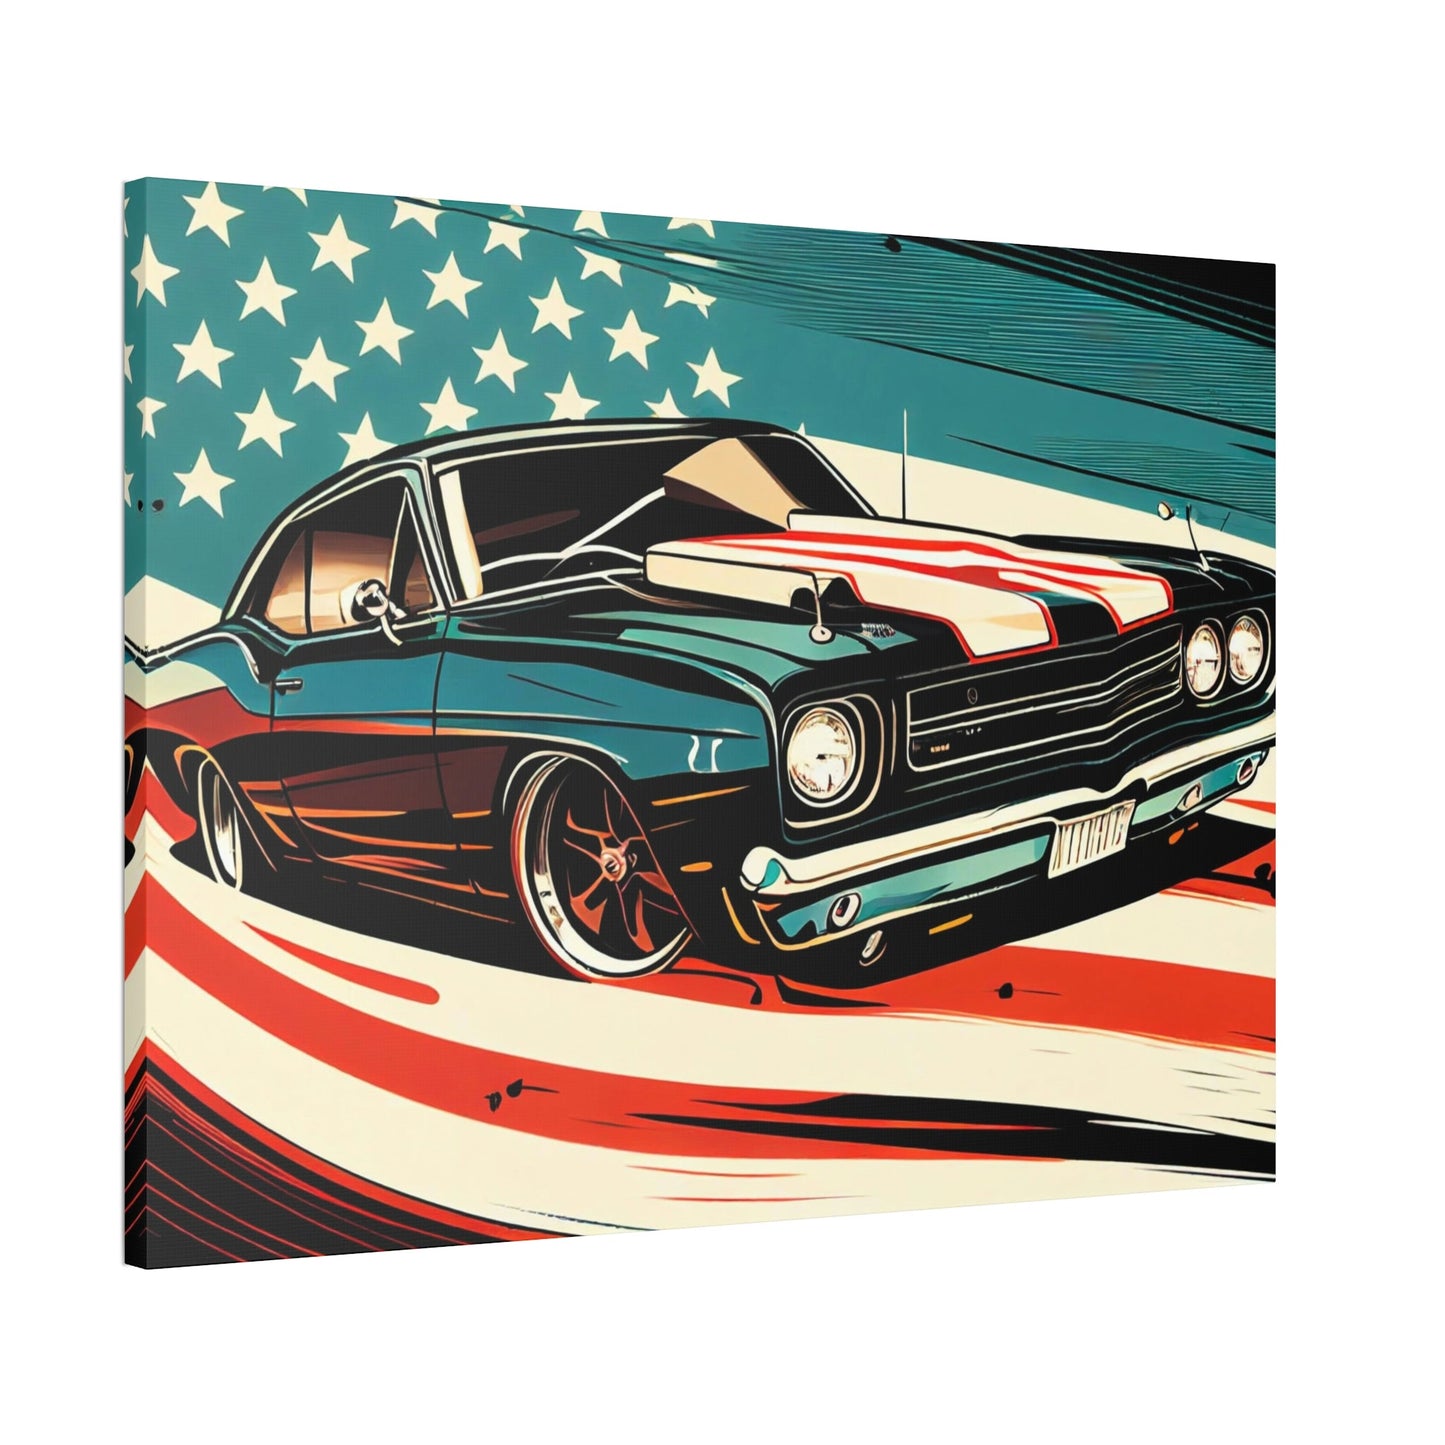 Free Spirit: Mustang Framed Wall Art and Canvas Print